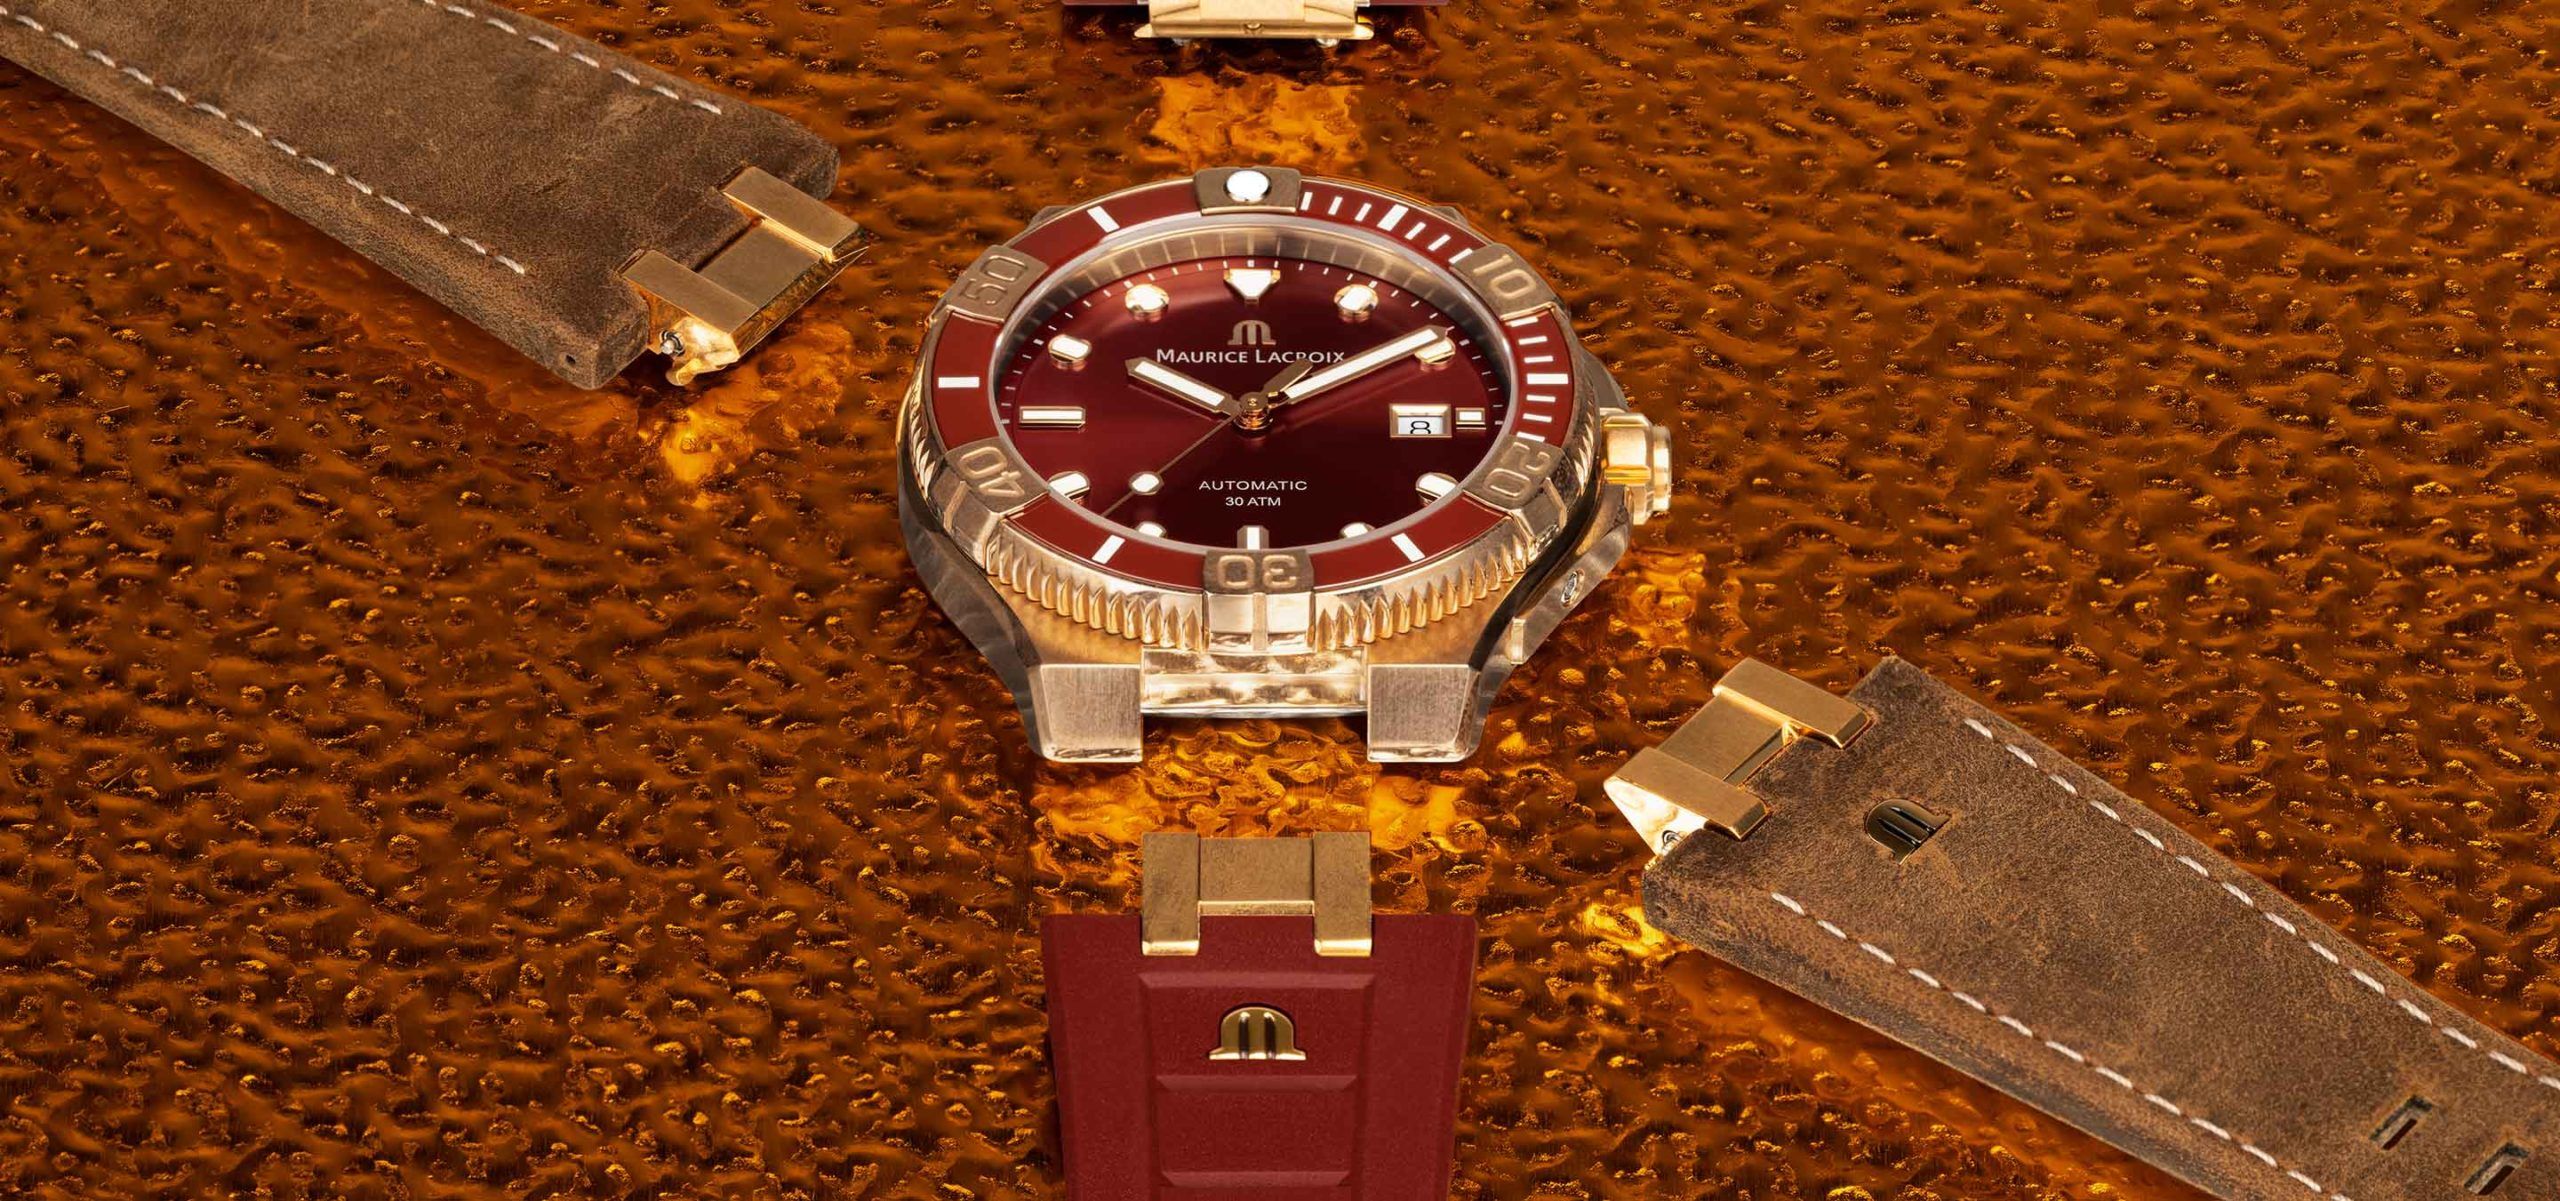 Bronze, Burgundy, Brilliance: Introducing The Maurice Lacroix Aikon Venturer Asia Special Edition